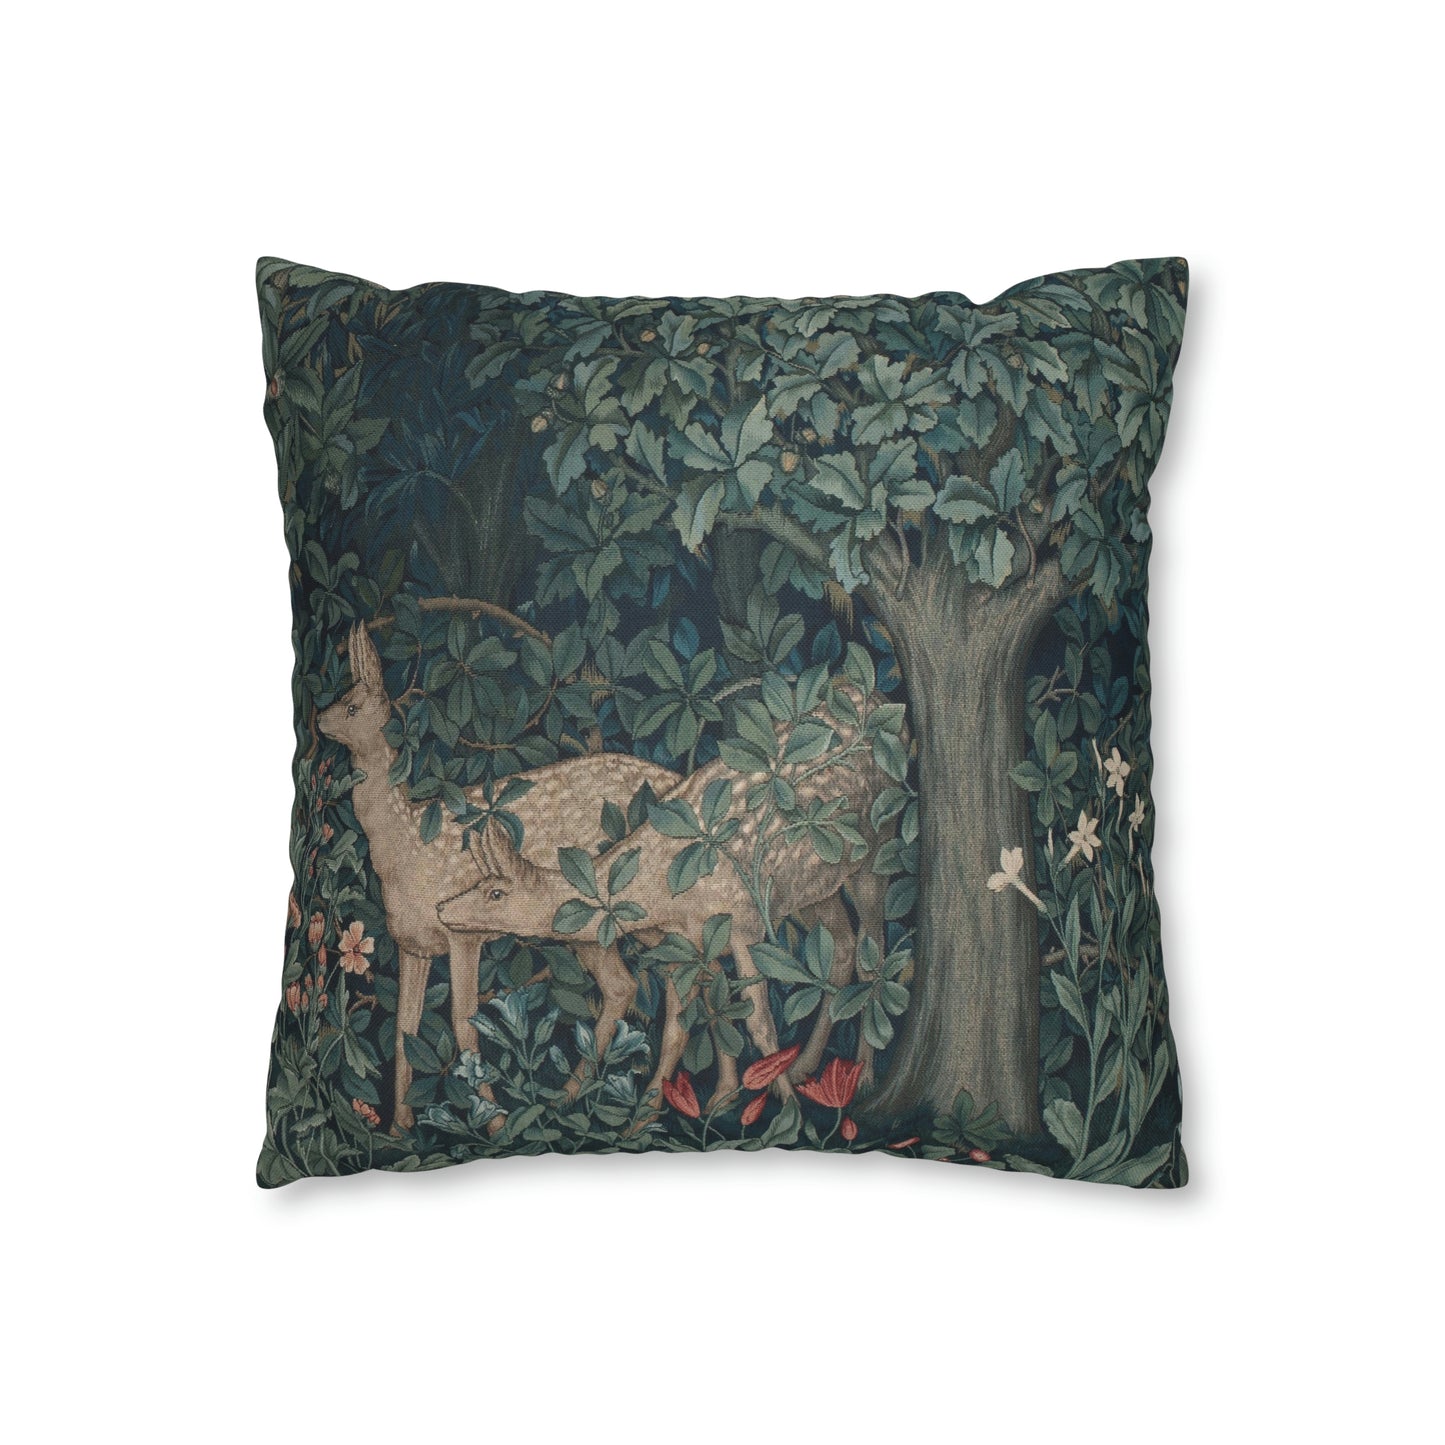 William Morris & Co Spun Poly Cushion Cover - Green Forest Collection (Dear)